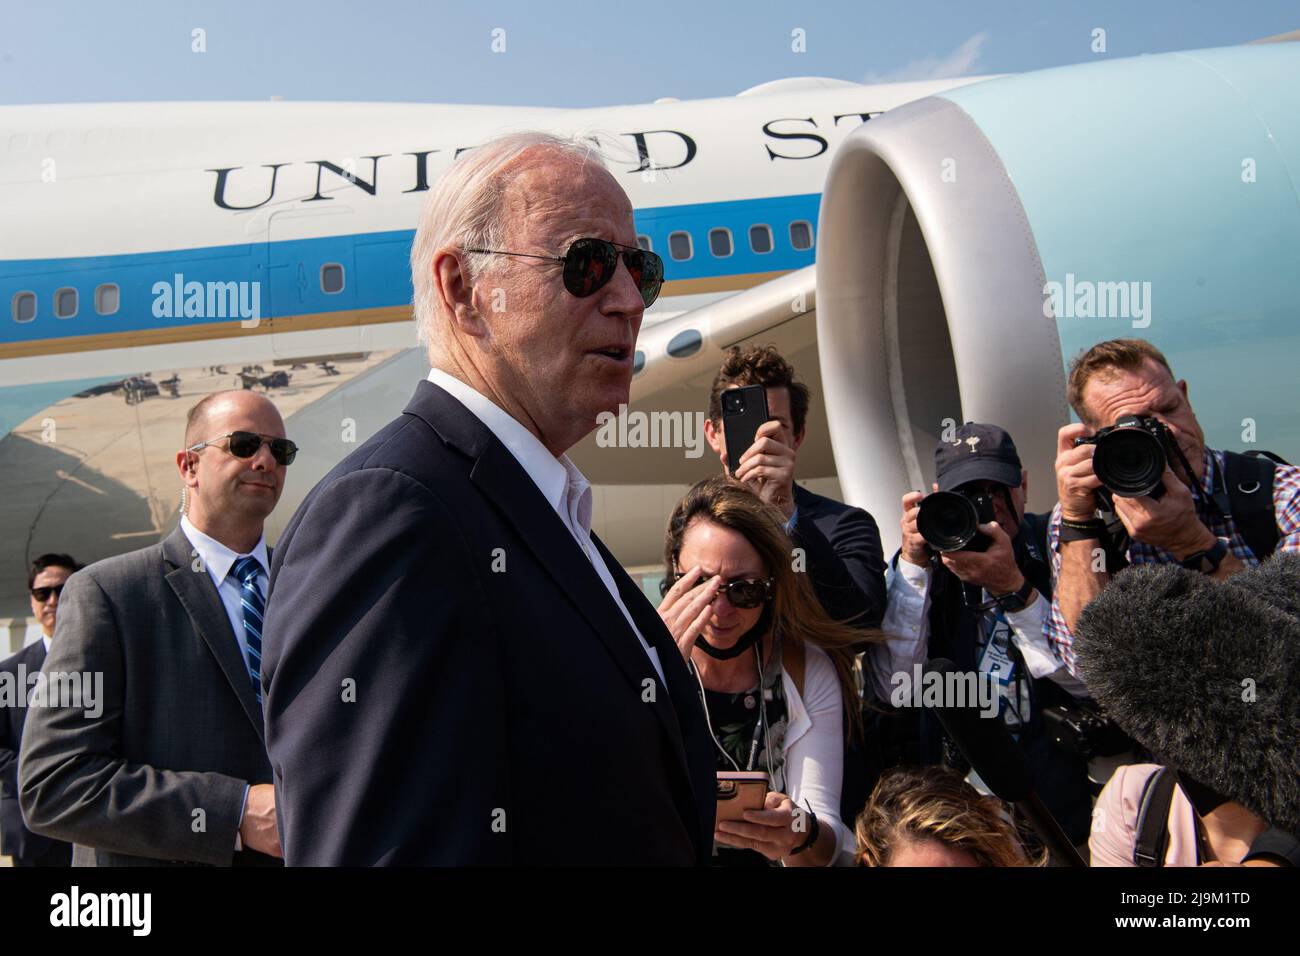 United States President Joe Biden interacts with press and media at Osan Air Base, Republic of Korea (ROK), on Sunday, May 22, 2022, at the end of his visit to the peninsula. The intent of the trip was to further strengthen relationships between the governments, economies and people of the U.S. and South Korea. In addition to this visit being Biden's first time visiting the country as POTUS, it was an opportunity for the president to interact with service members and their families. Photo by Senior Airman Allison Payne/U.S. Air Force/UPI Credit: UPI/Alamy Live News Stock Photo